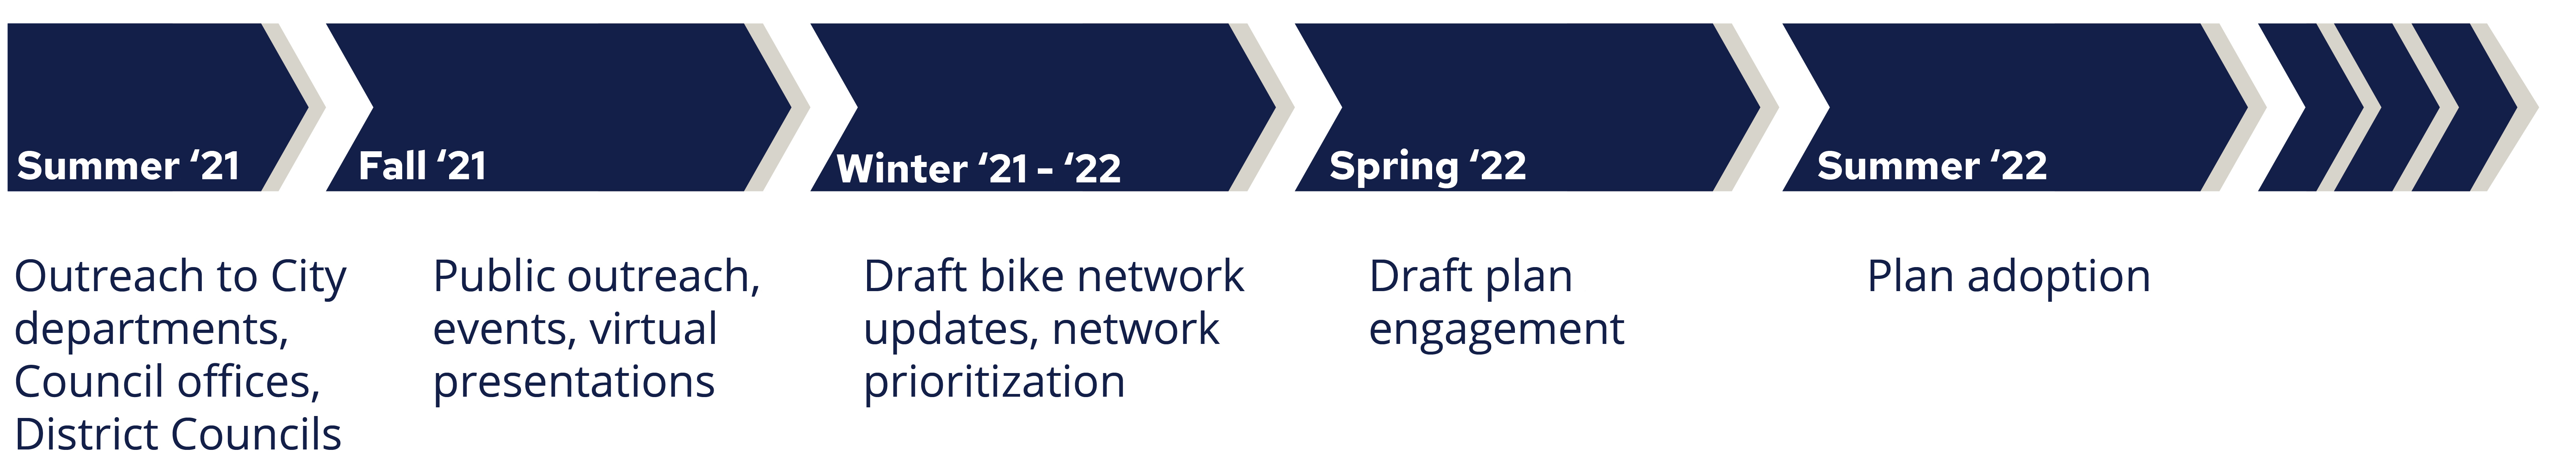 image showing the planning process timeline with engagement opportunities Fall 2021 and Spring 2022, with plan adoption scheduled summer 2022